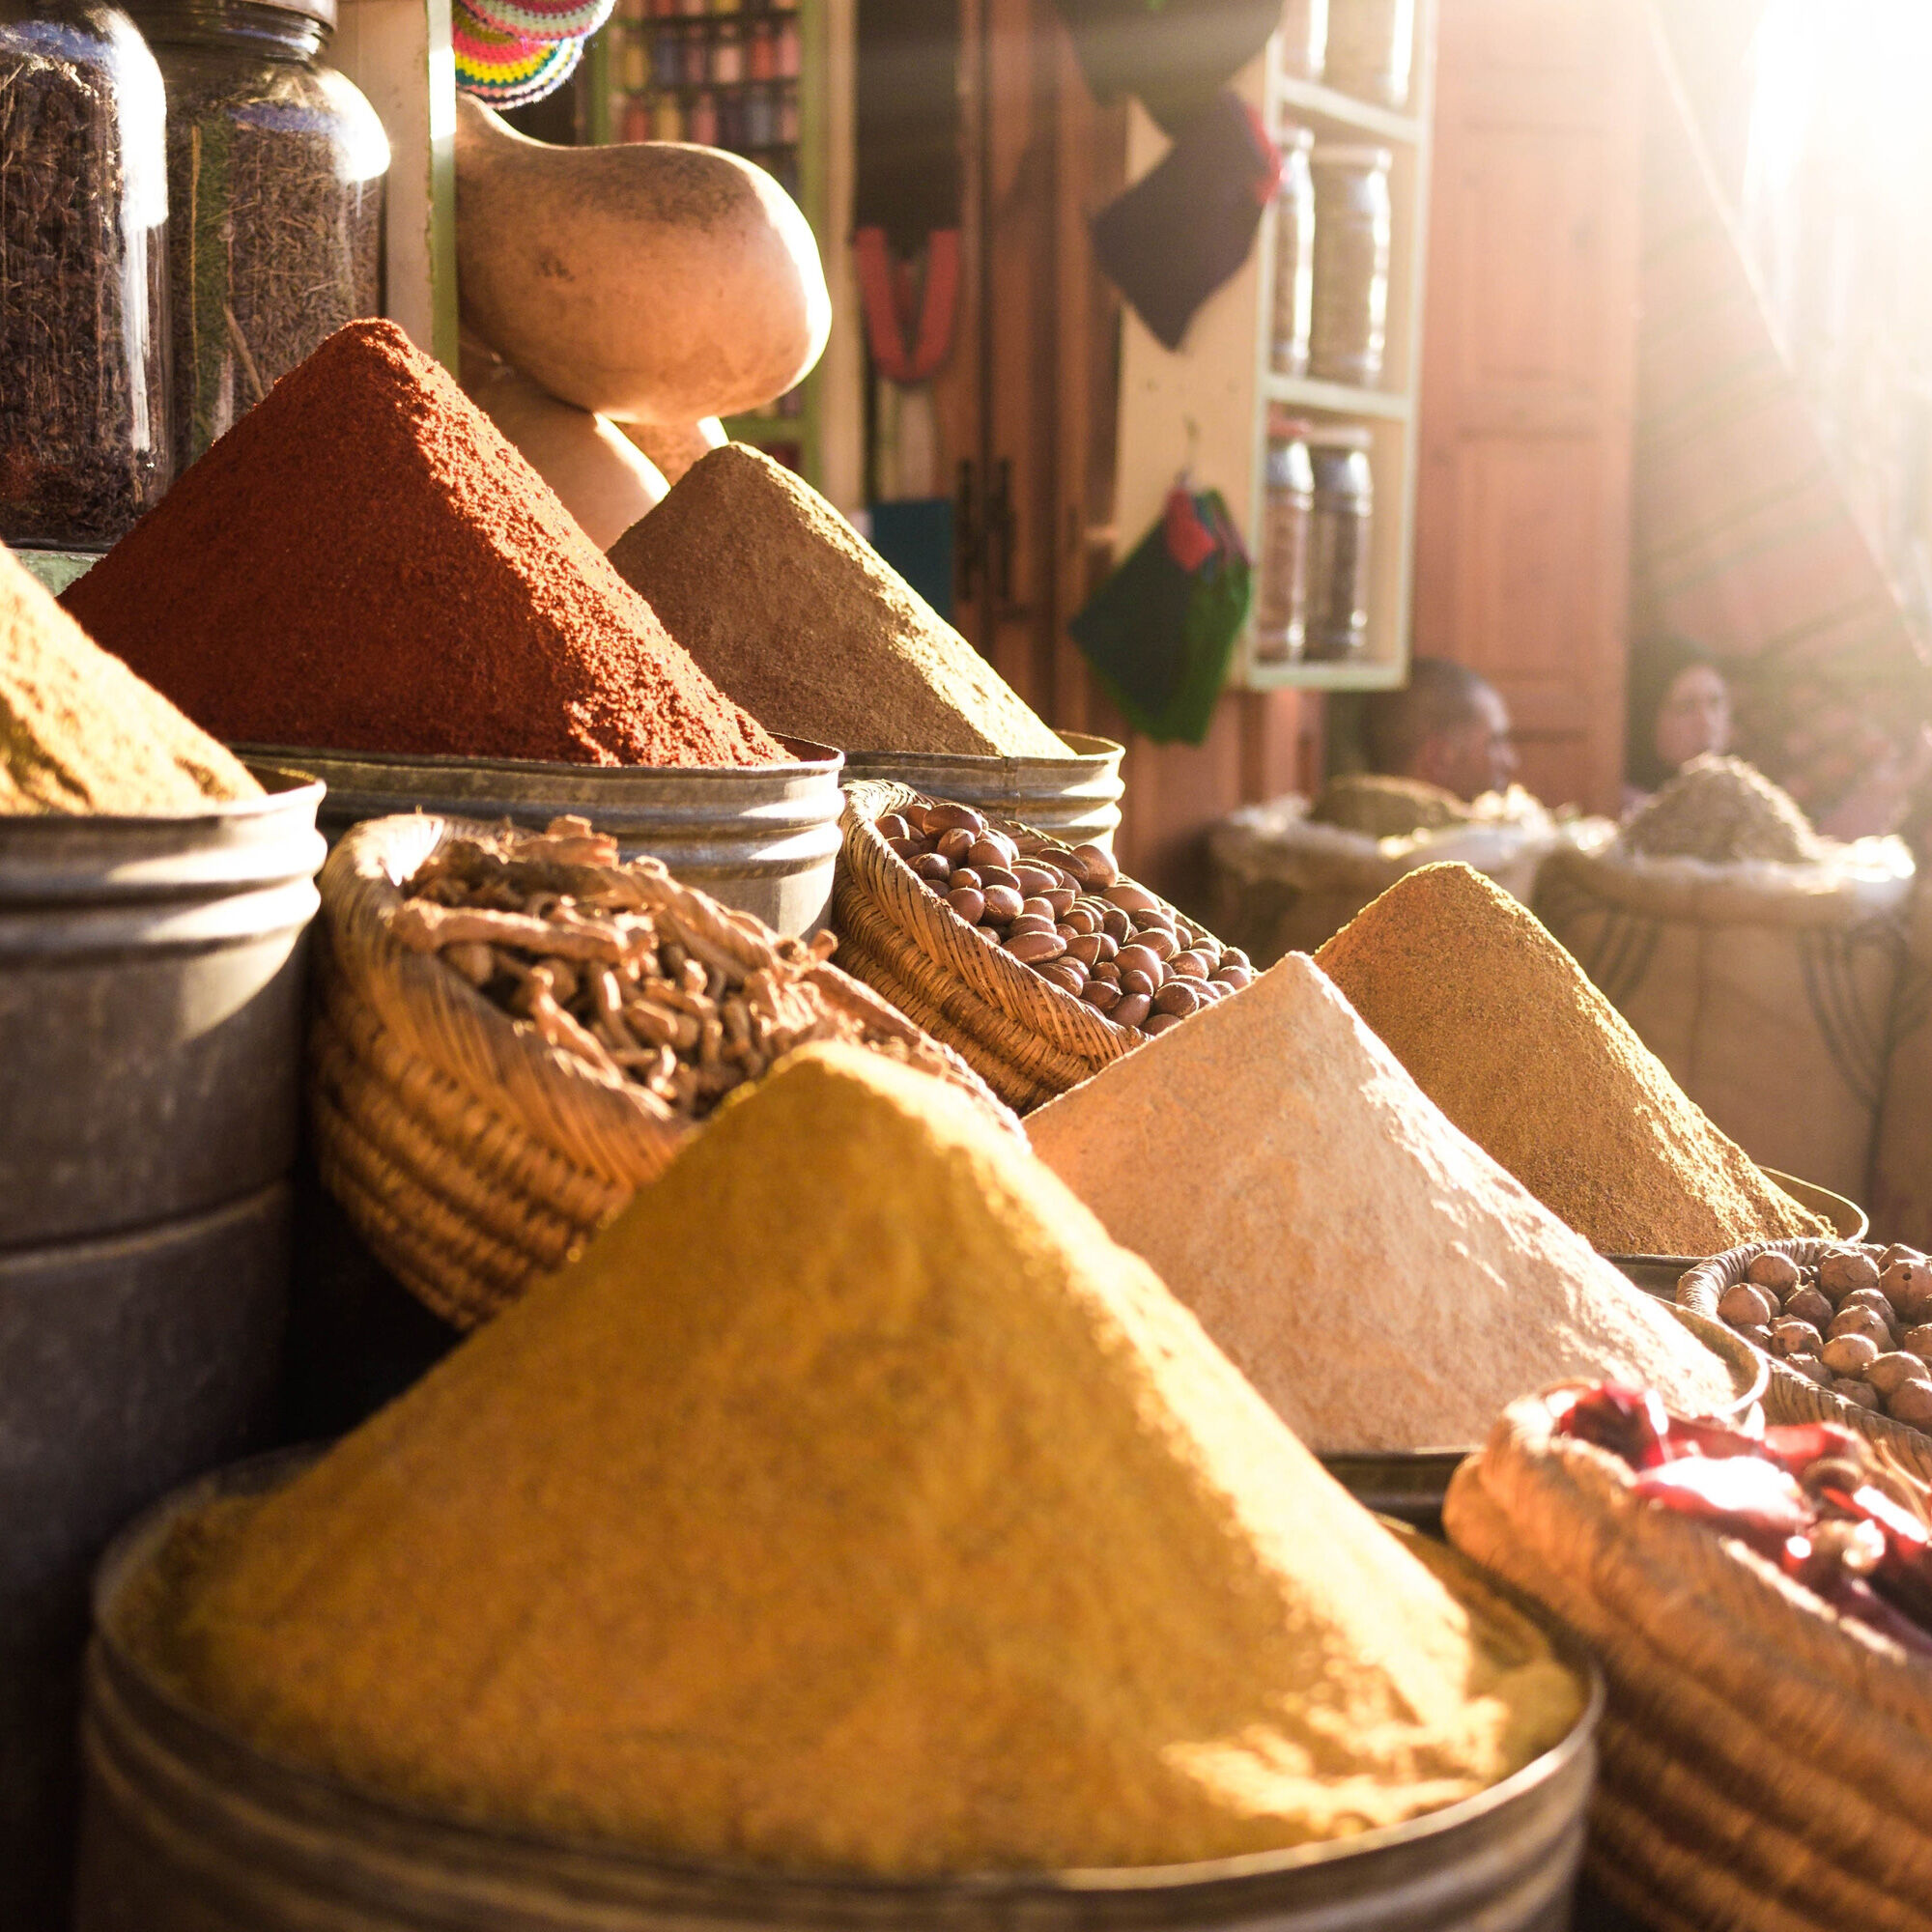 Ancient spices and herbs